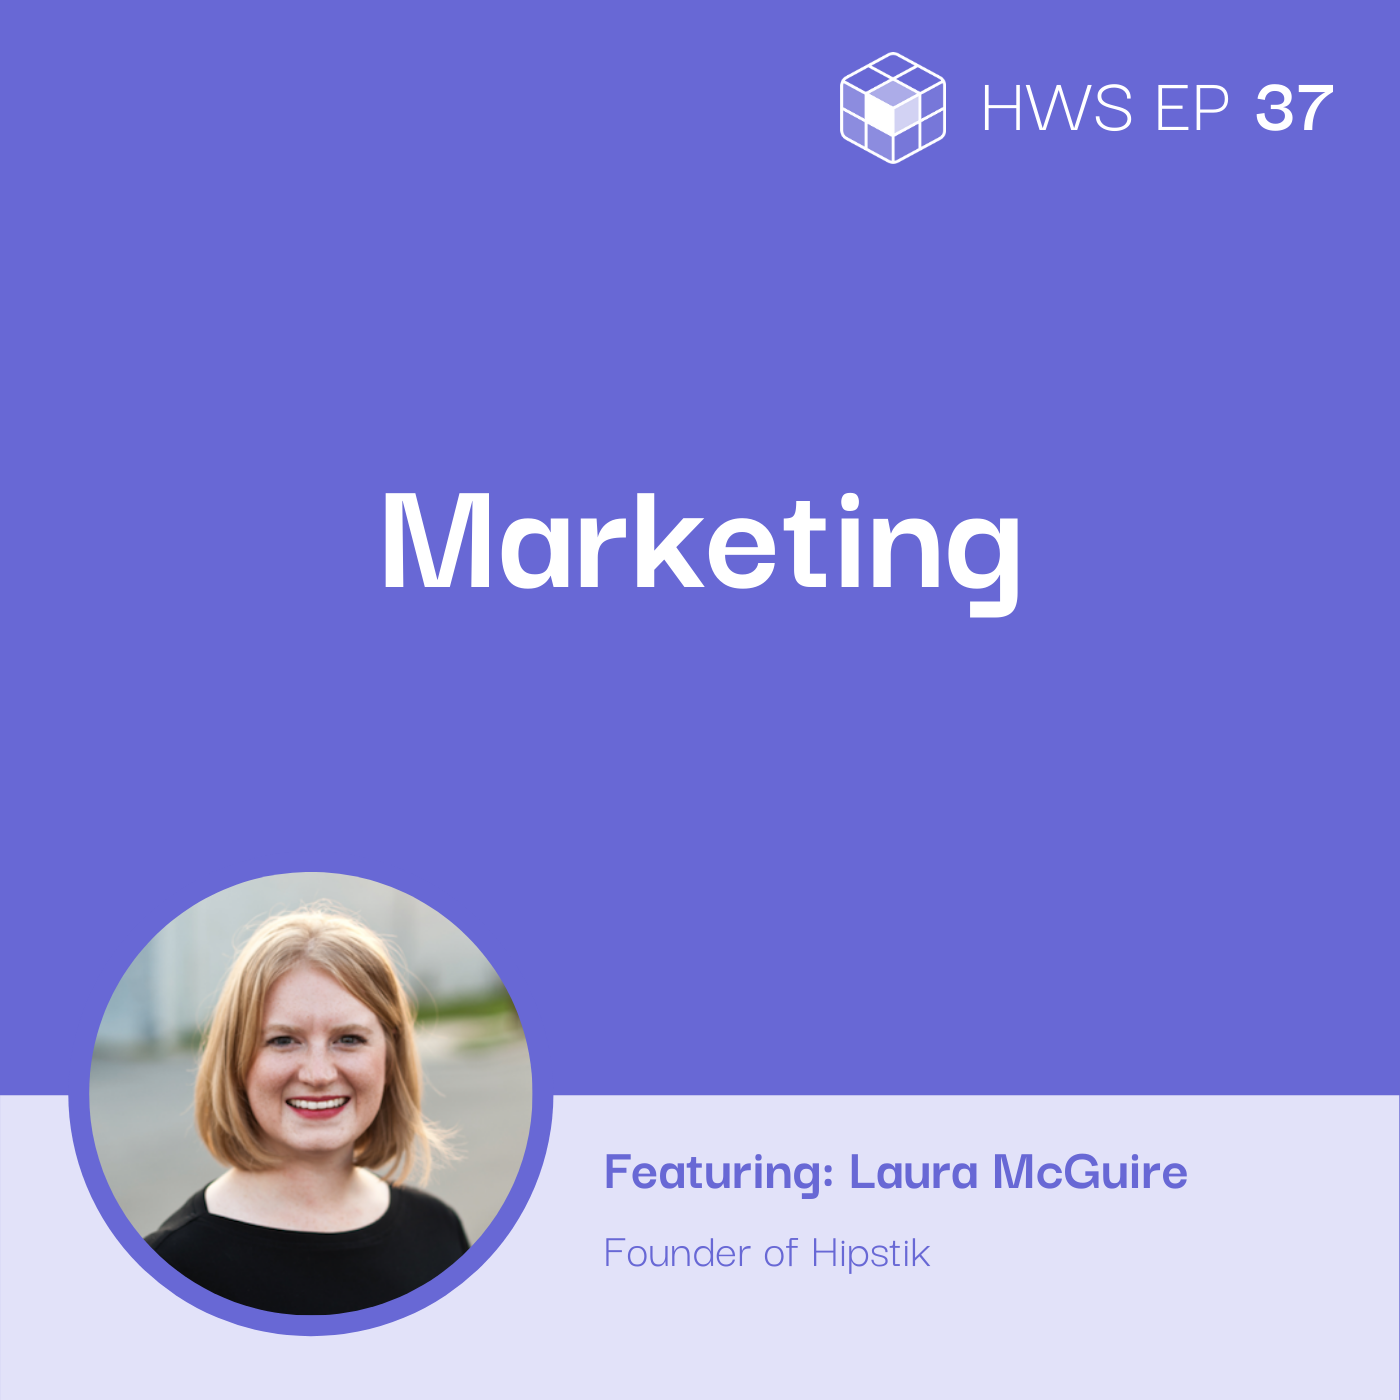 Laura McGuire from Hipstik on how to design, launch, and market women's clothing products